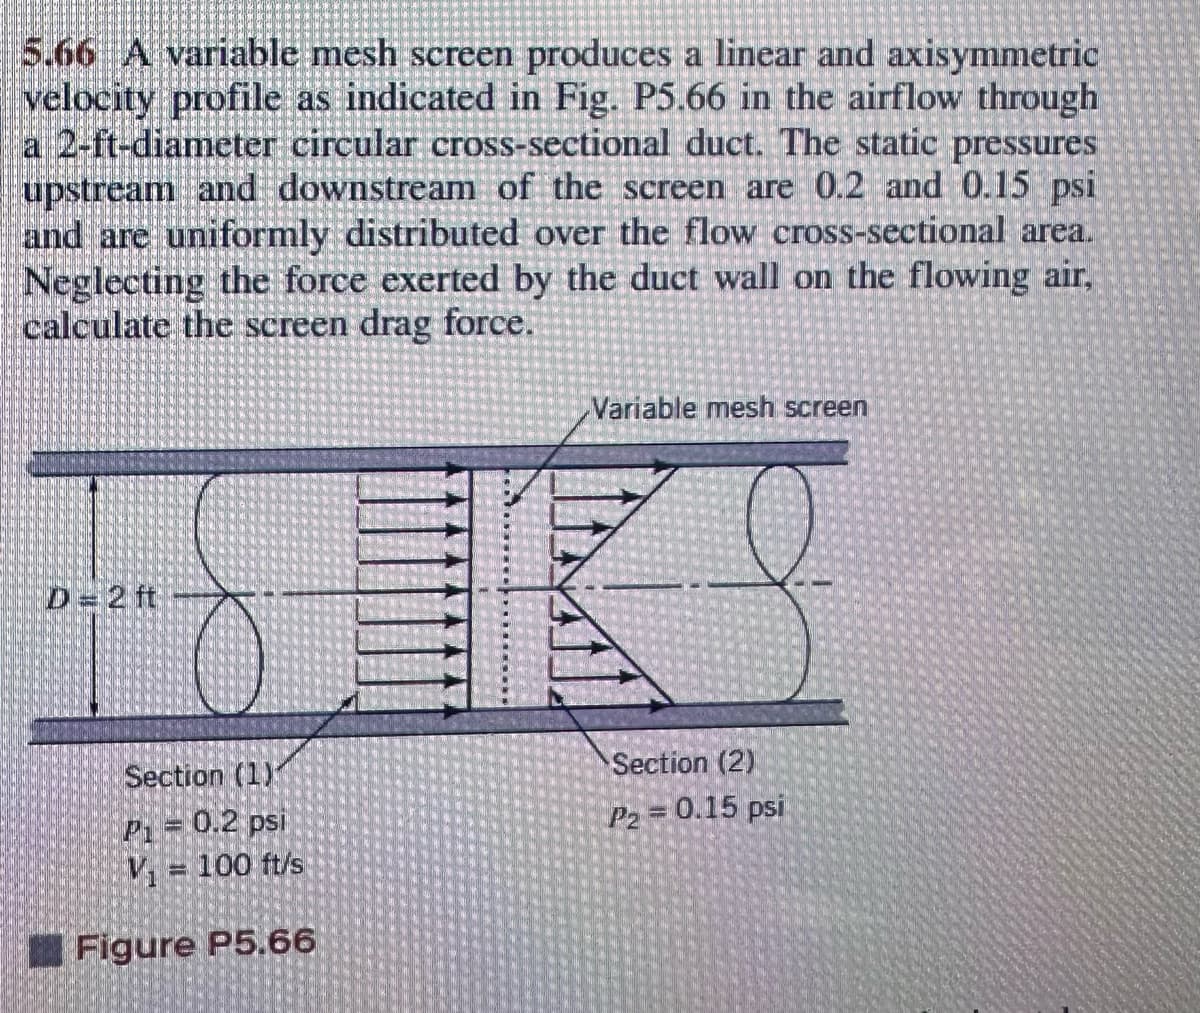 5.66 A variable mesh screen produces a linear and axisymmetric
velocity profile as indicated in Fig. P5.66 in the airflow through
a 2-ft-diameter circular cross-sectional duct. The static pressures
upstream and downstream of the screen are 0.2 and 0.15 psi
and are uniformly distributed over the flow cross-sectional area.
Neglecting the force exerted by the duct wall on the flowing air,
calculate the screen drag force.
Variable mesh screen
D=2 ft
Section (1)
P₁ = 0.2 psi
V₁ = 100 ft/s
Figure P5.66
Section (2)
P2 = 0.15 psi